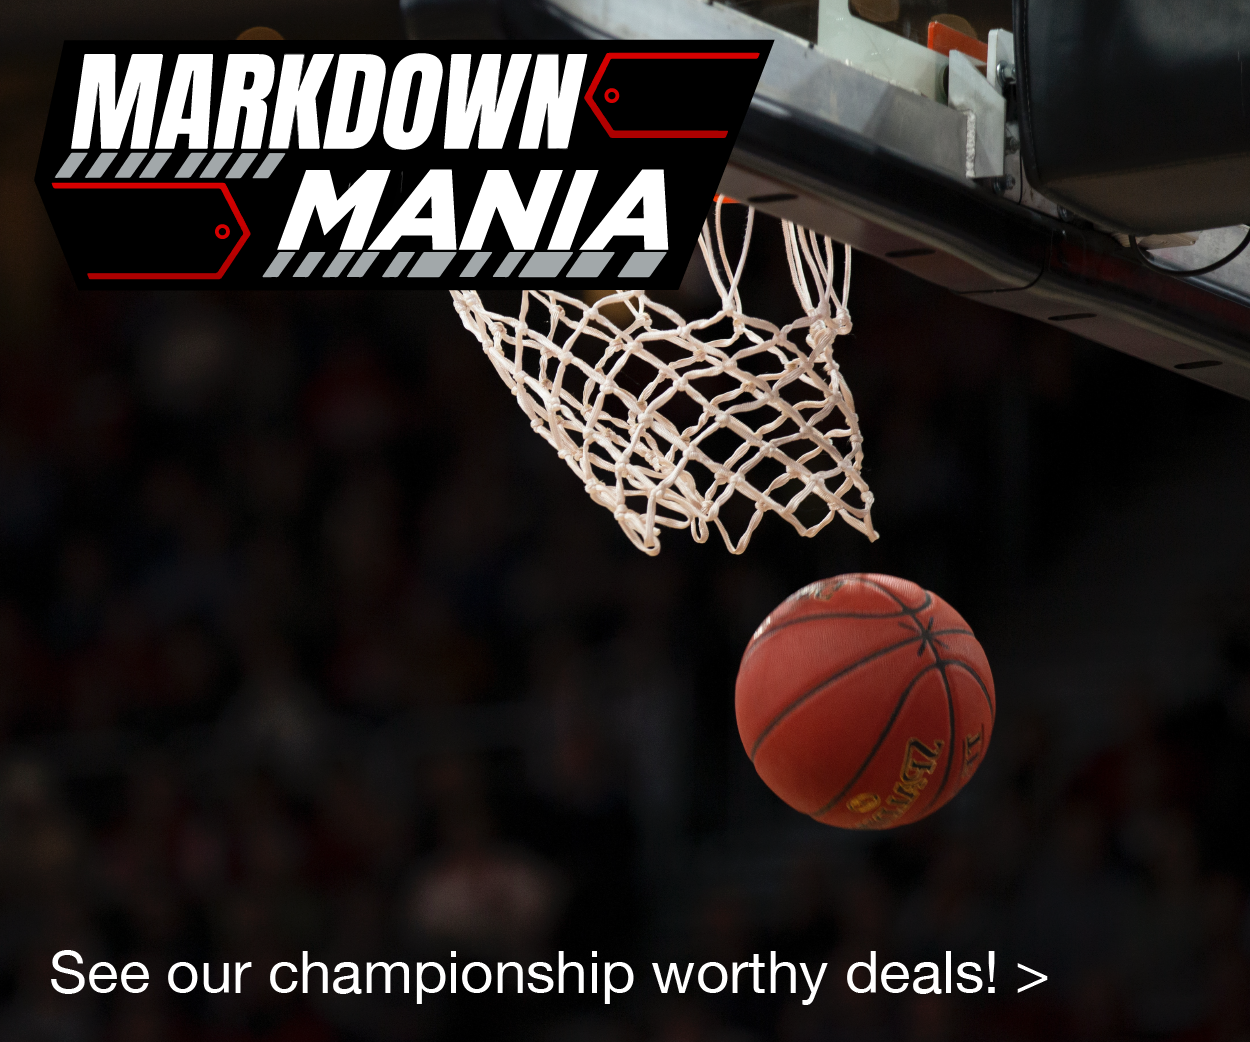 Markdown Mania! See our championship worthy deals!